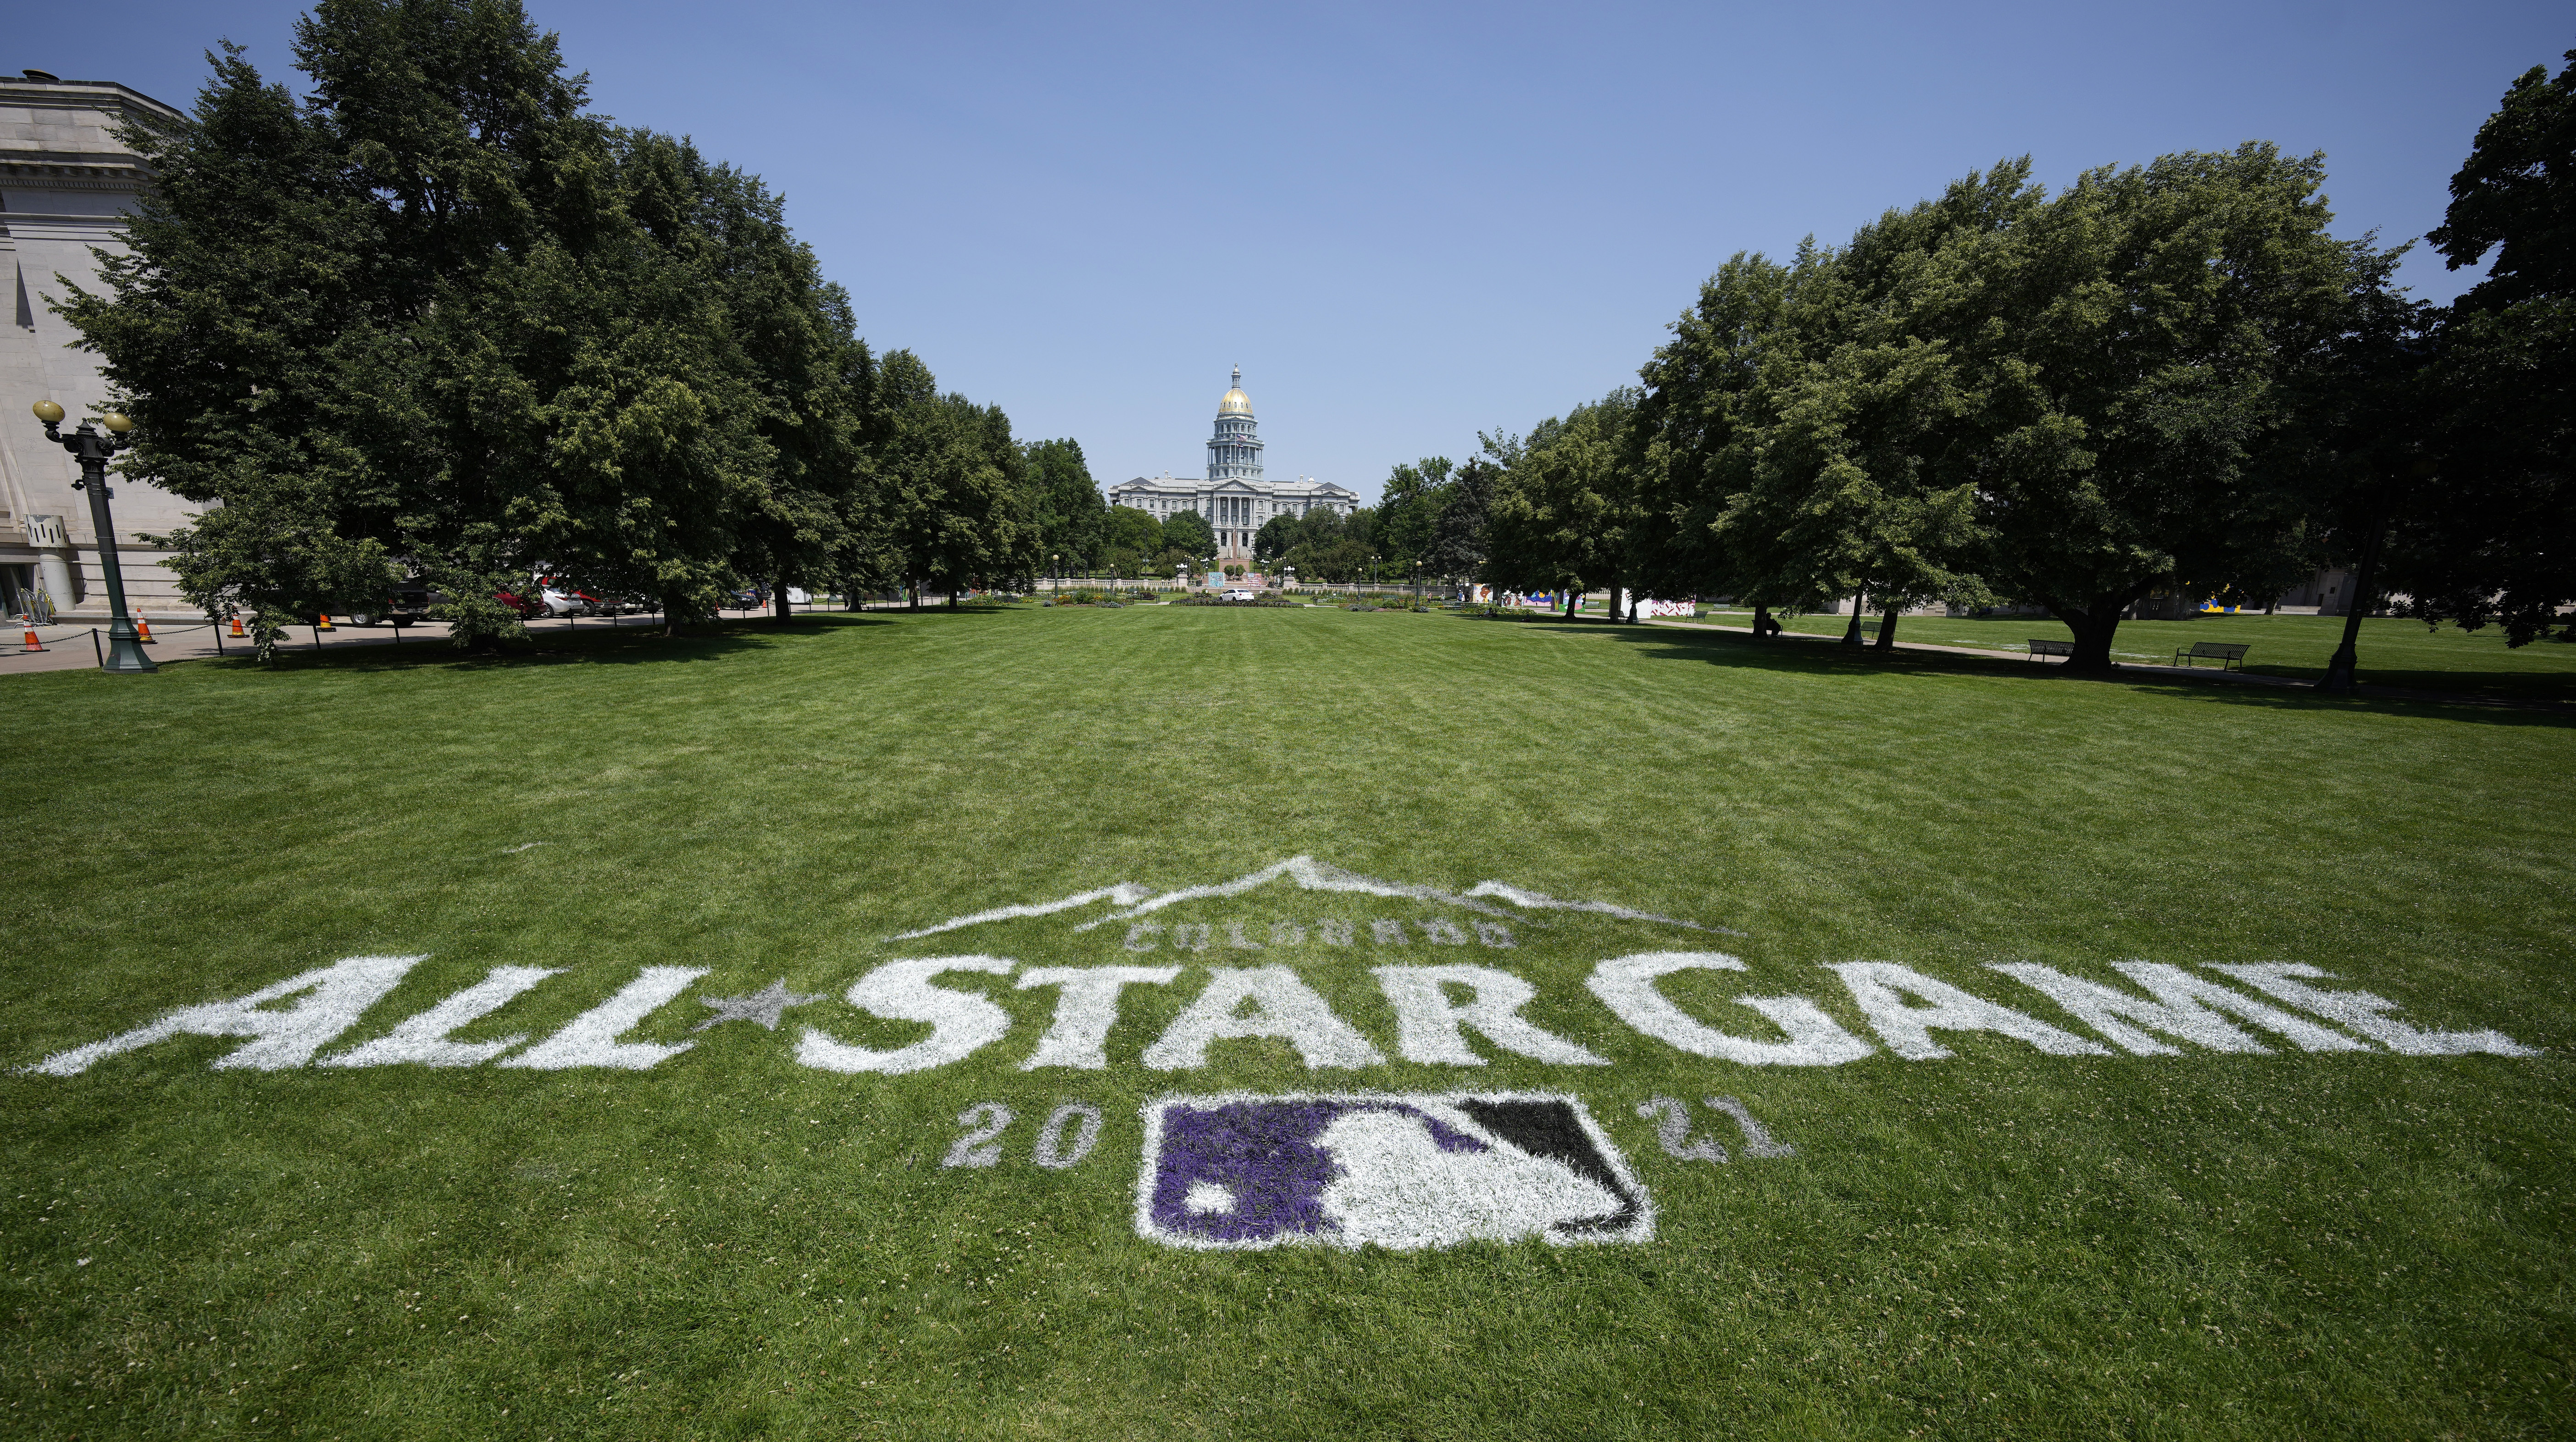 2021 MLB All-Star Game: Live updates, rosters, start time and